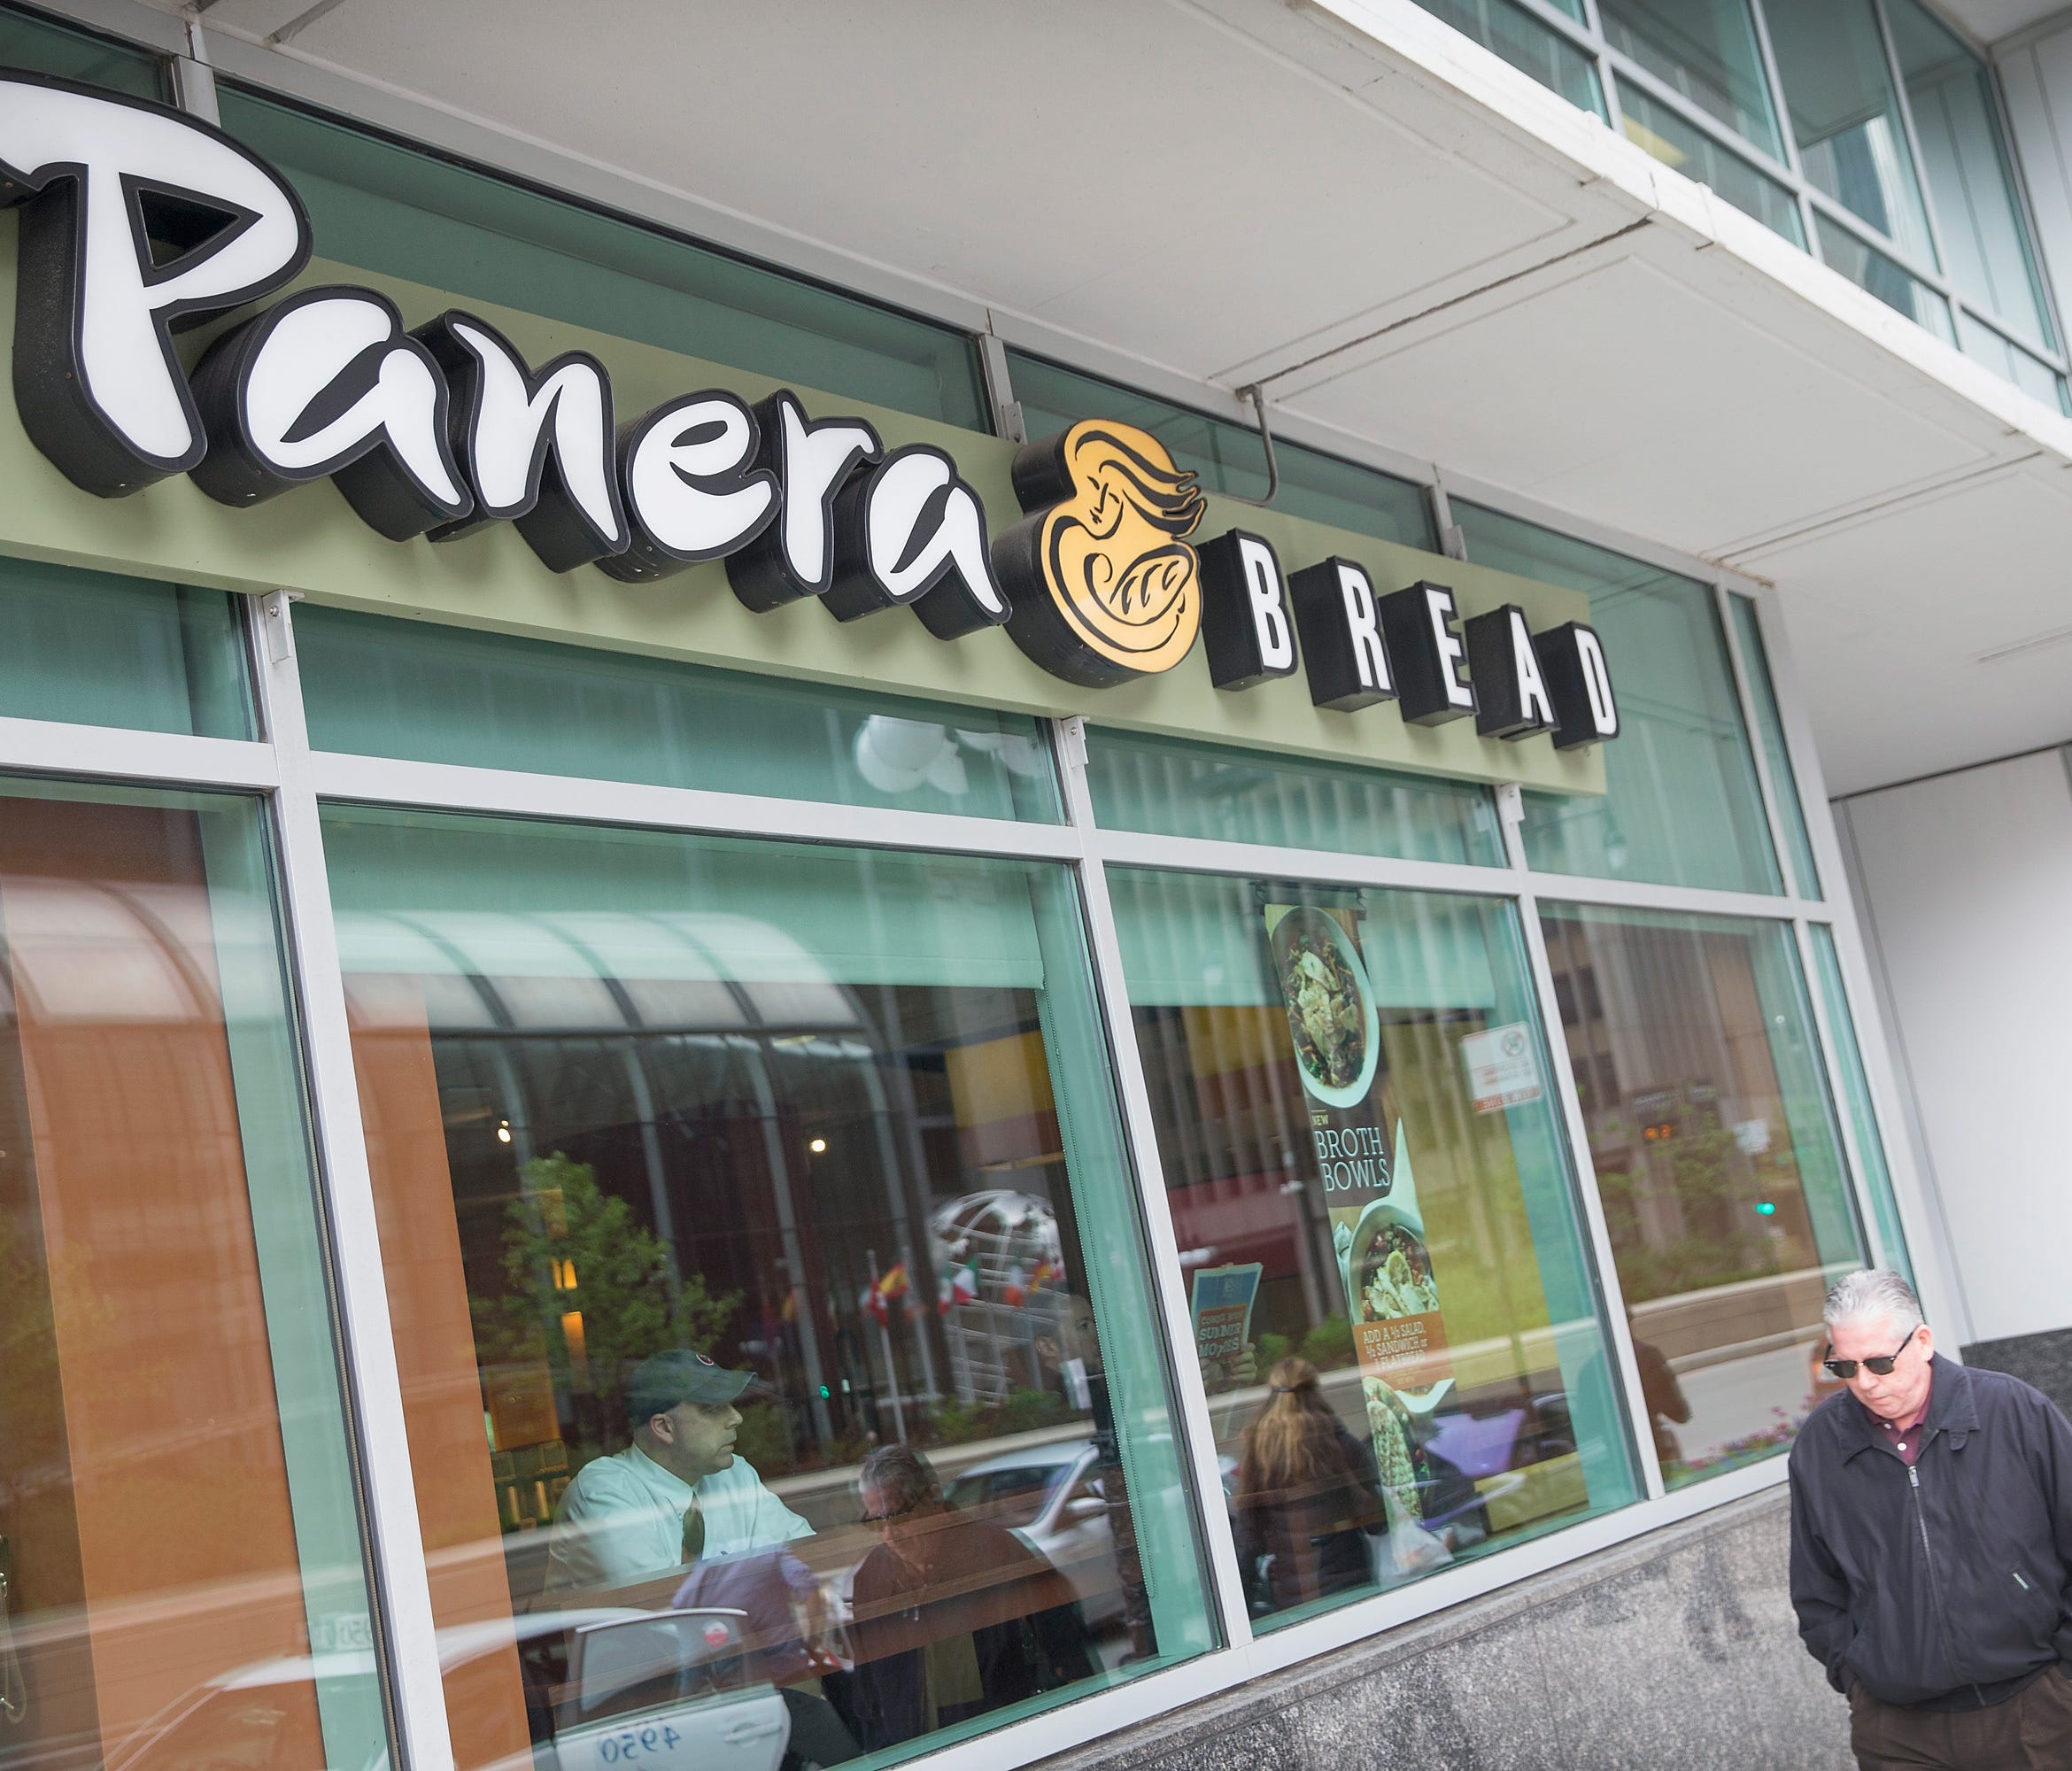 Rumors about a possible Panera sale have sent the stock price up.